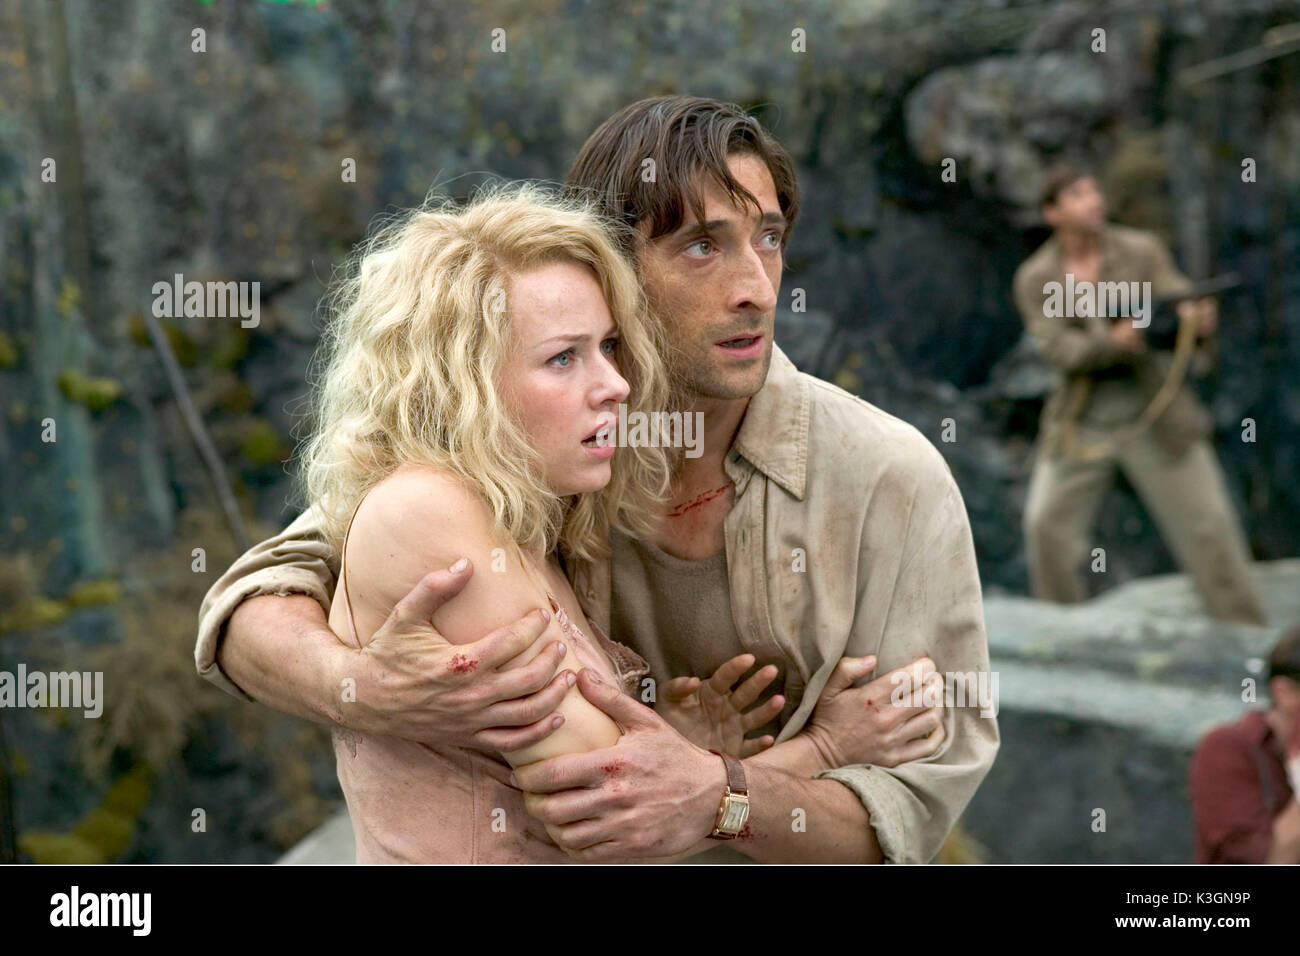 KING KONG, Naomi Watts, Adrien Brody Date : 2005 Banque D'Images